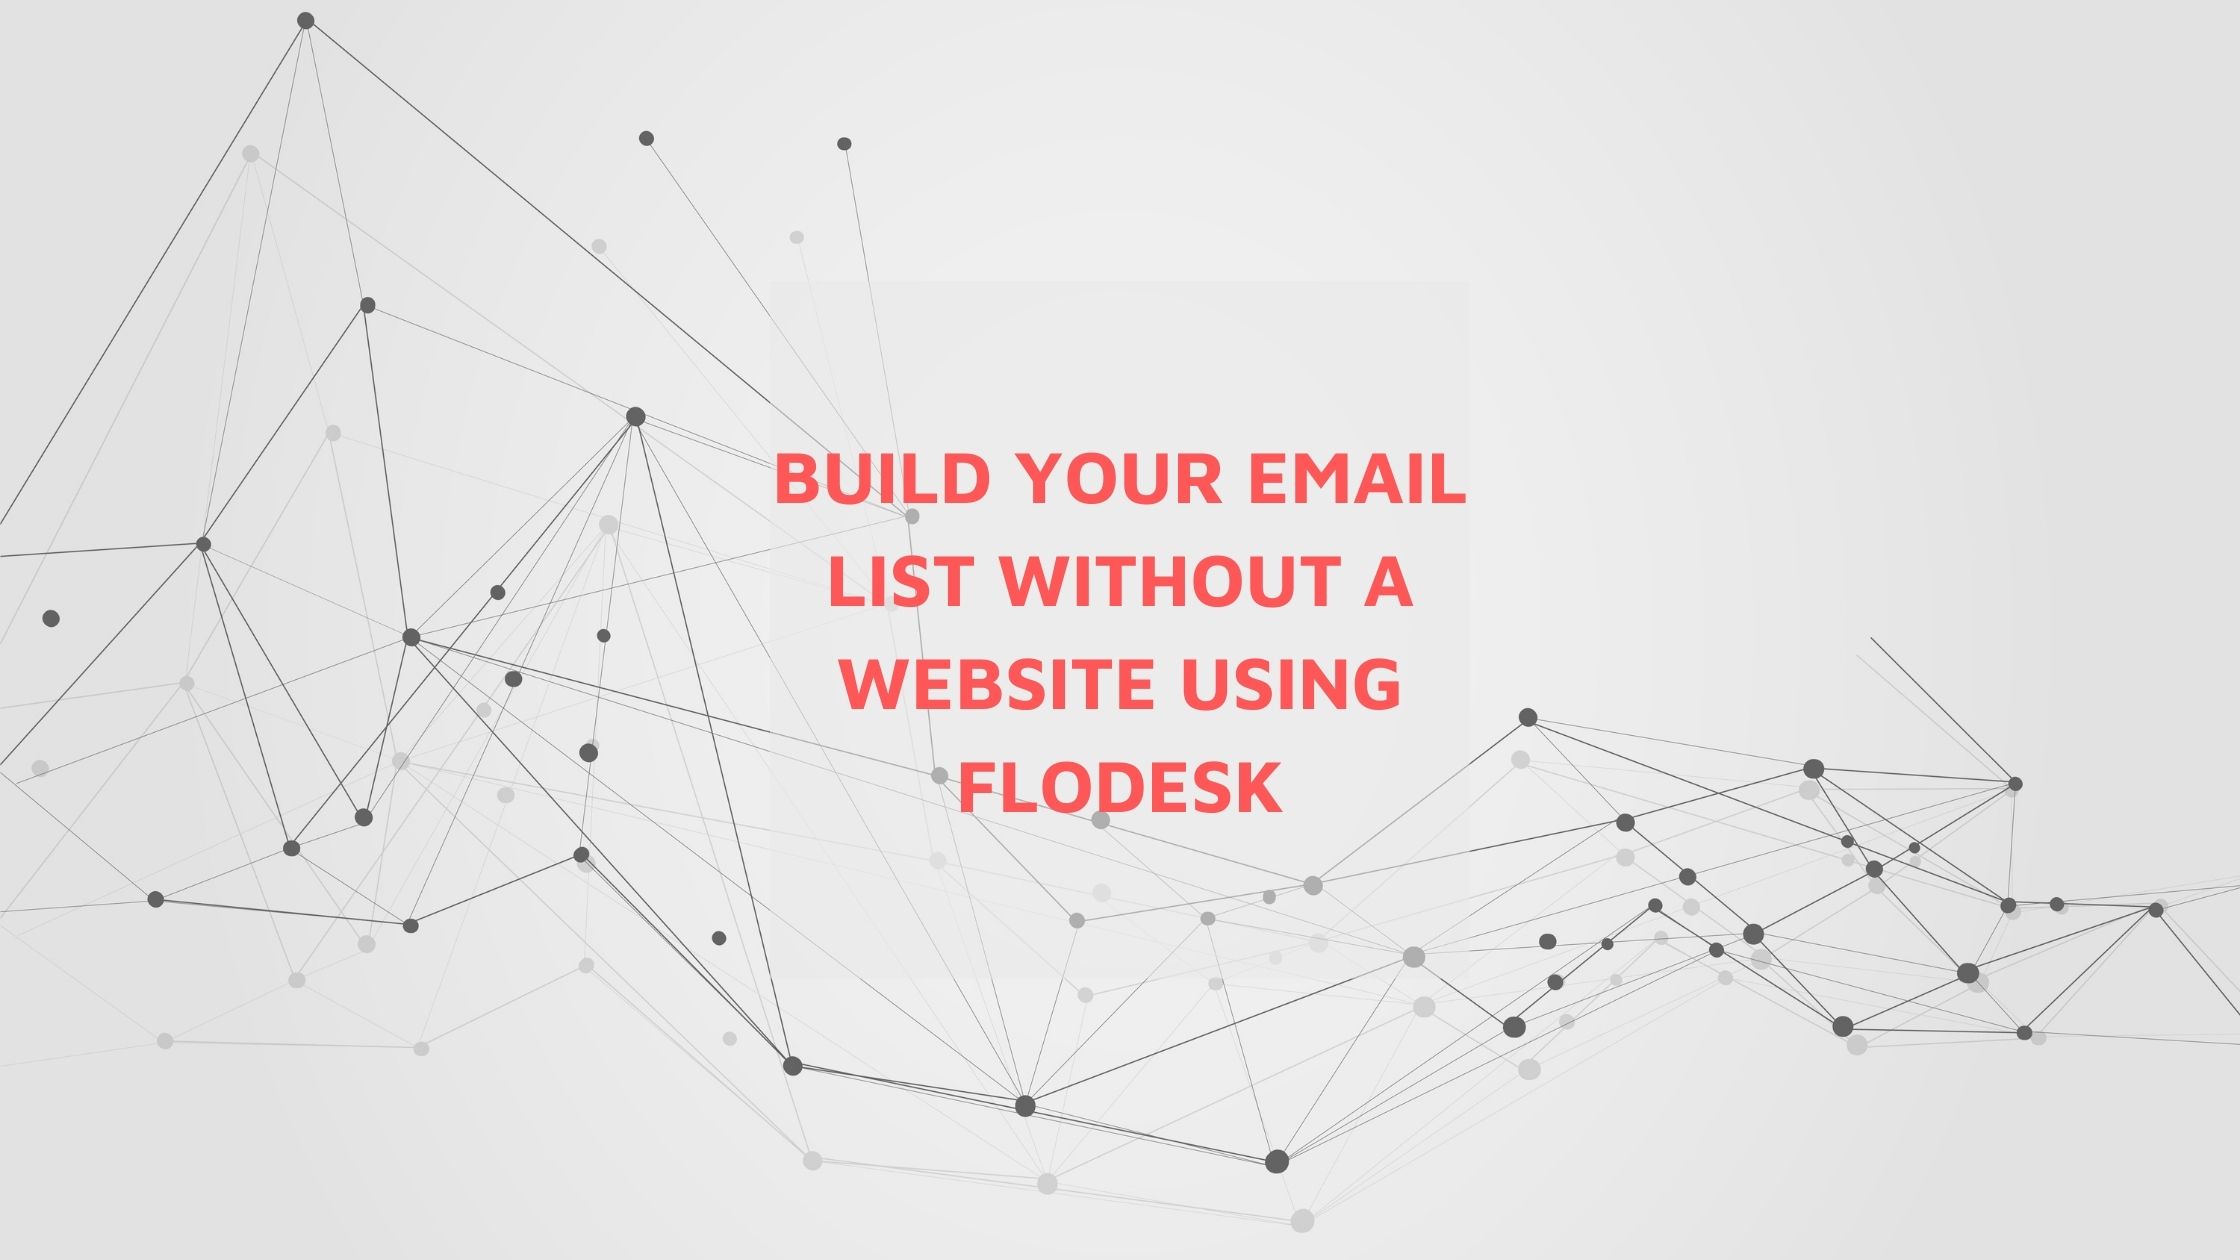 Build your email list without a website using flodesk